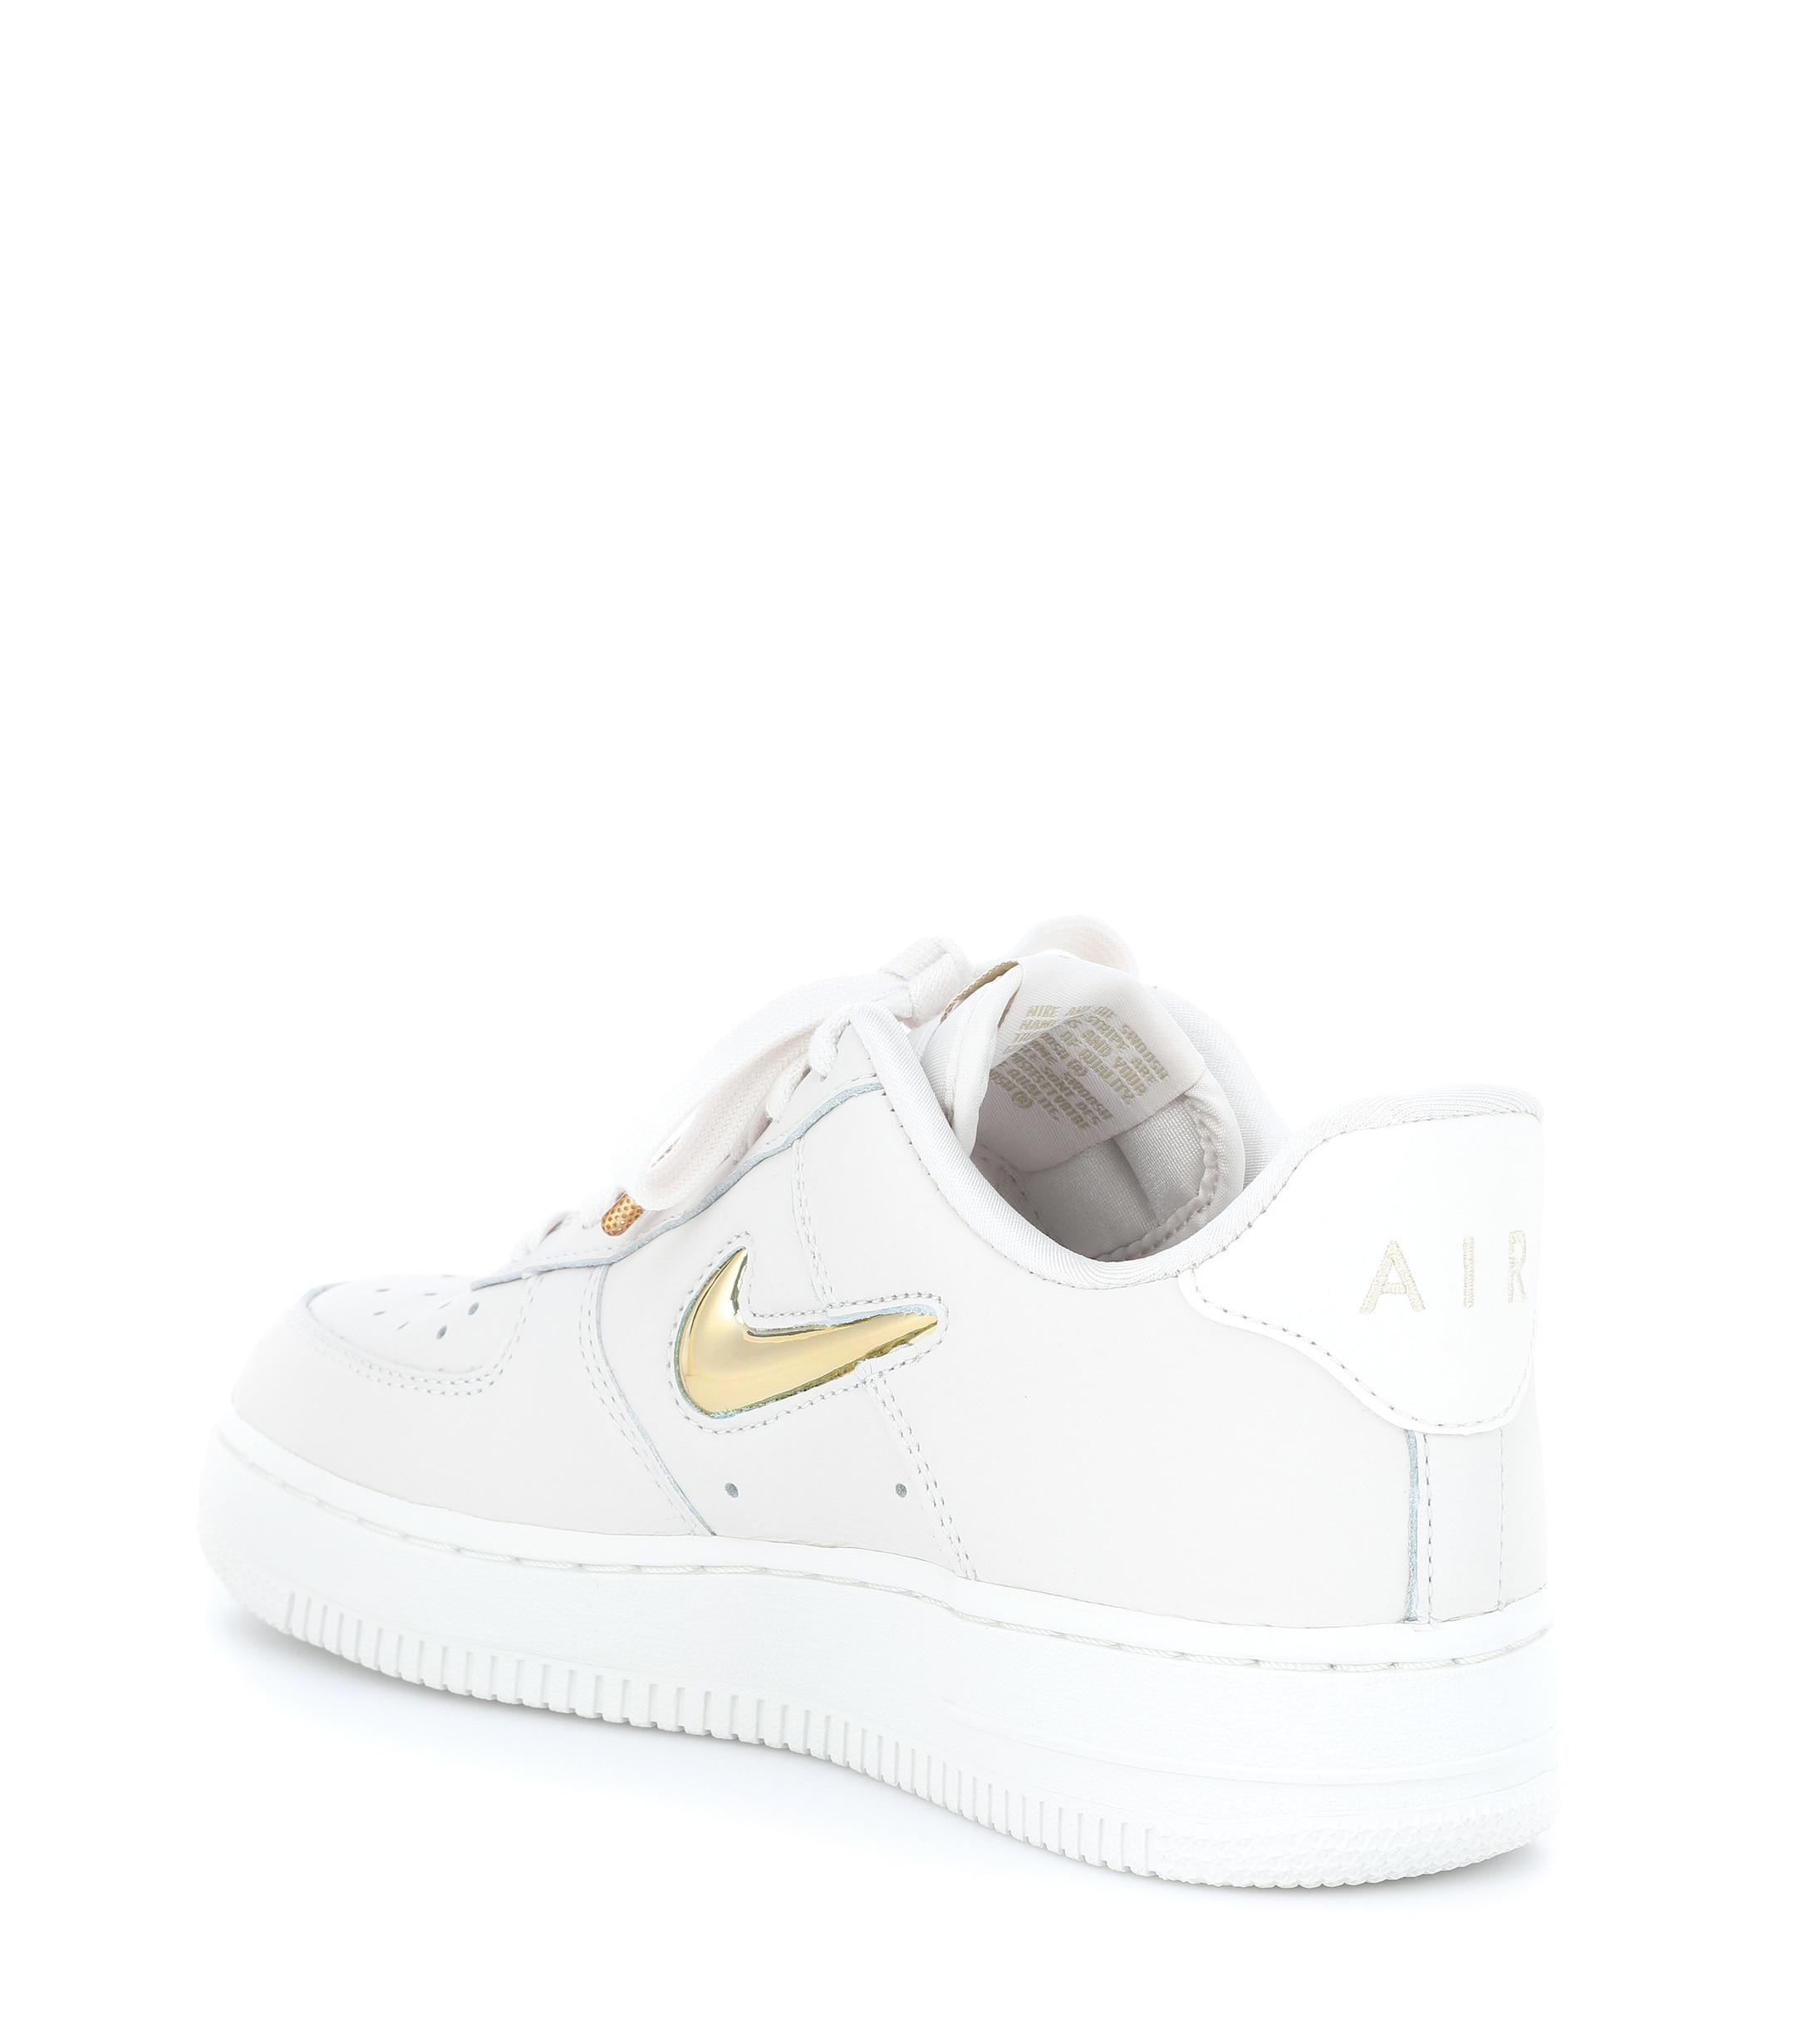 Nike Air Force 1 '07 Premium Lx Sneakers in White | Lyst